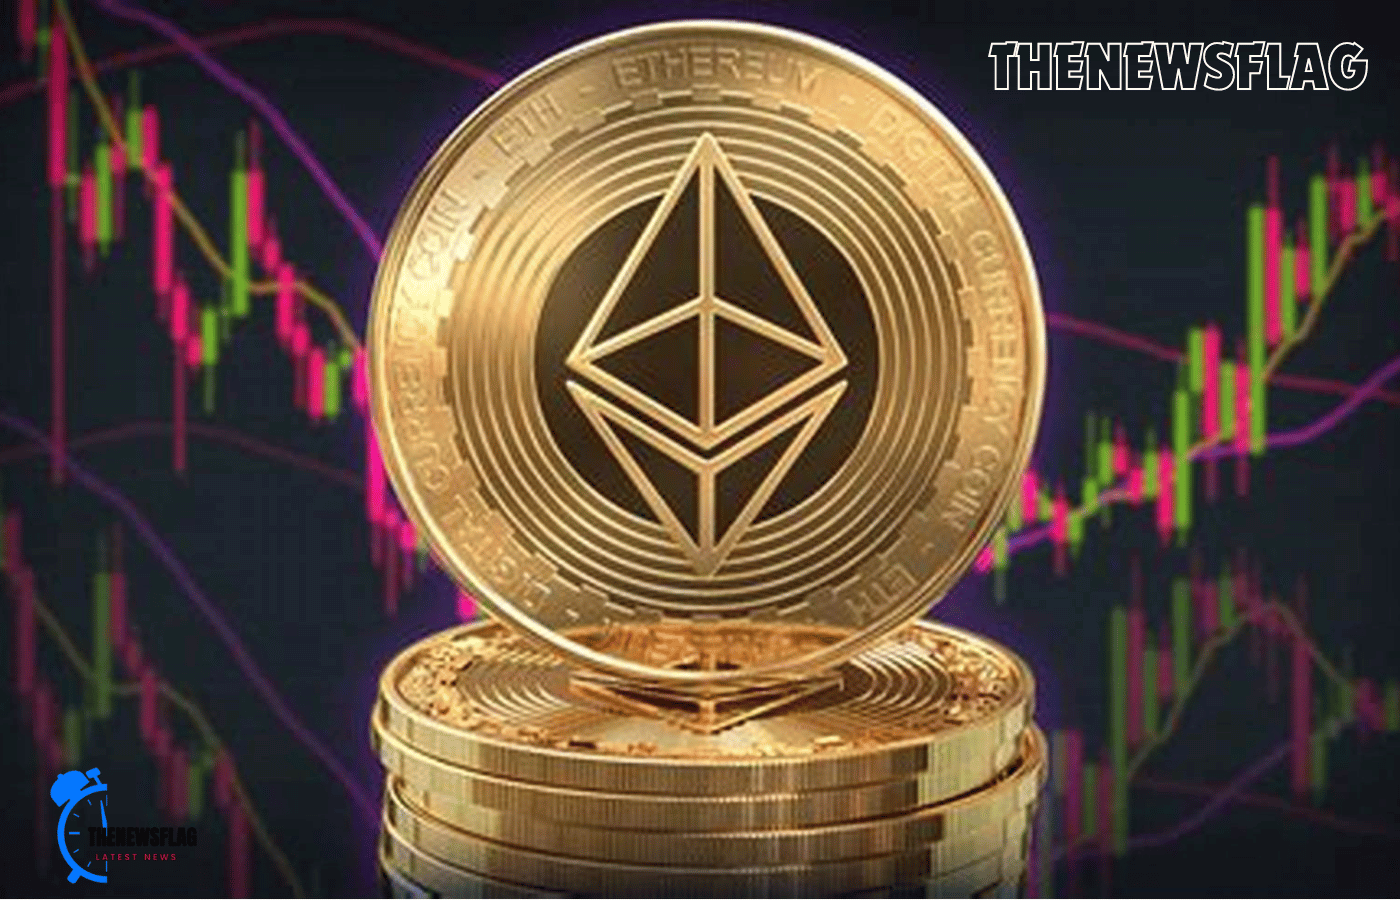 After Dencun, Ethereum Dynamics Remain Positive, But Price Correction Risk Is There: CryptoQuant